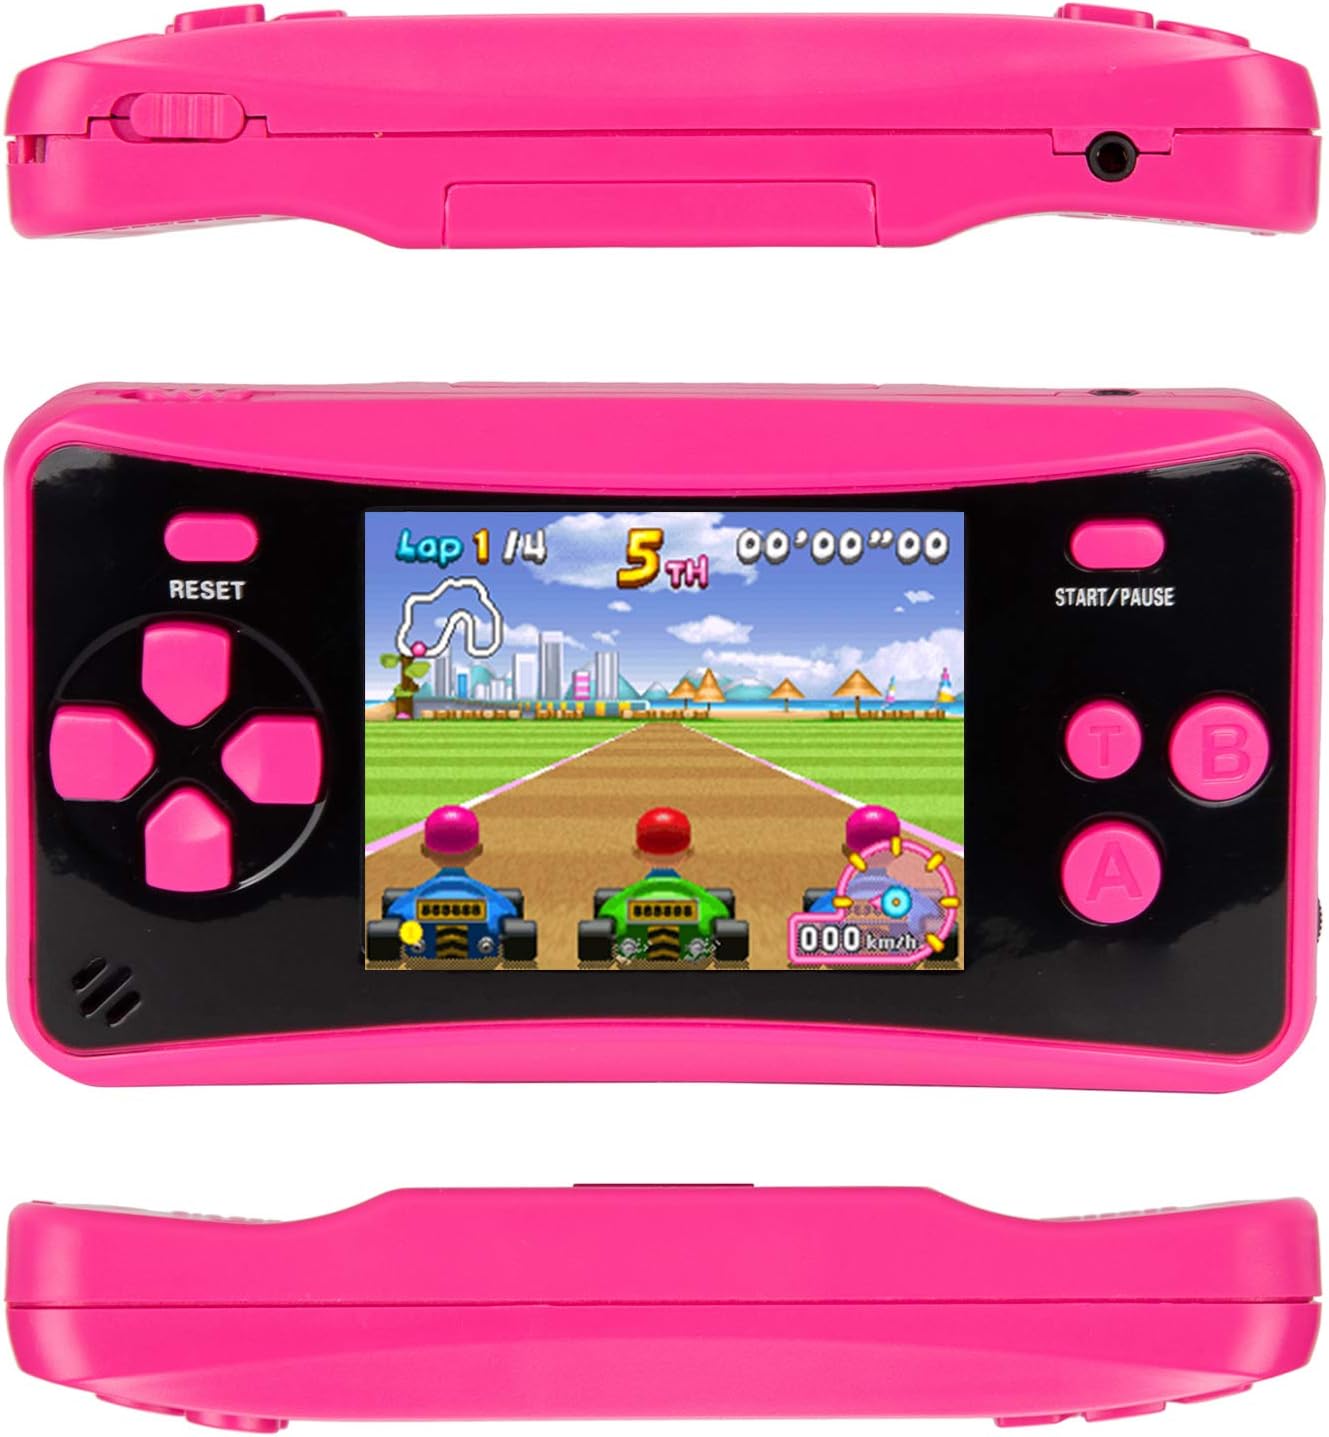 HigoKids Handheld Game for Kids Portable Retro Video Game Player Built-in 182 Classic Games 2.5 inches LCD Screen Family Recreation Arcade Gaming Formation Birthday Present for Children-Rose red